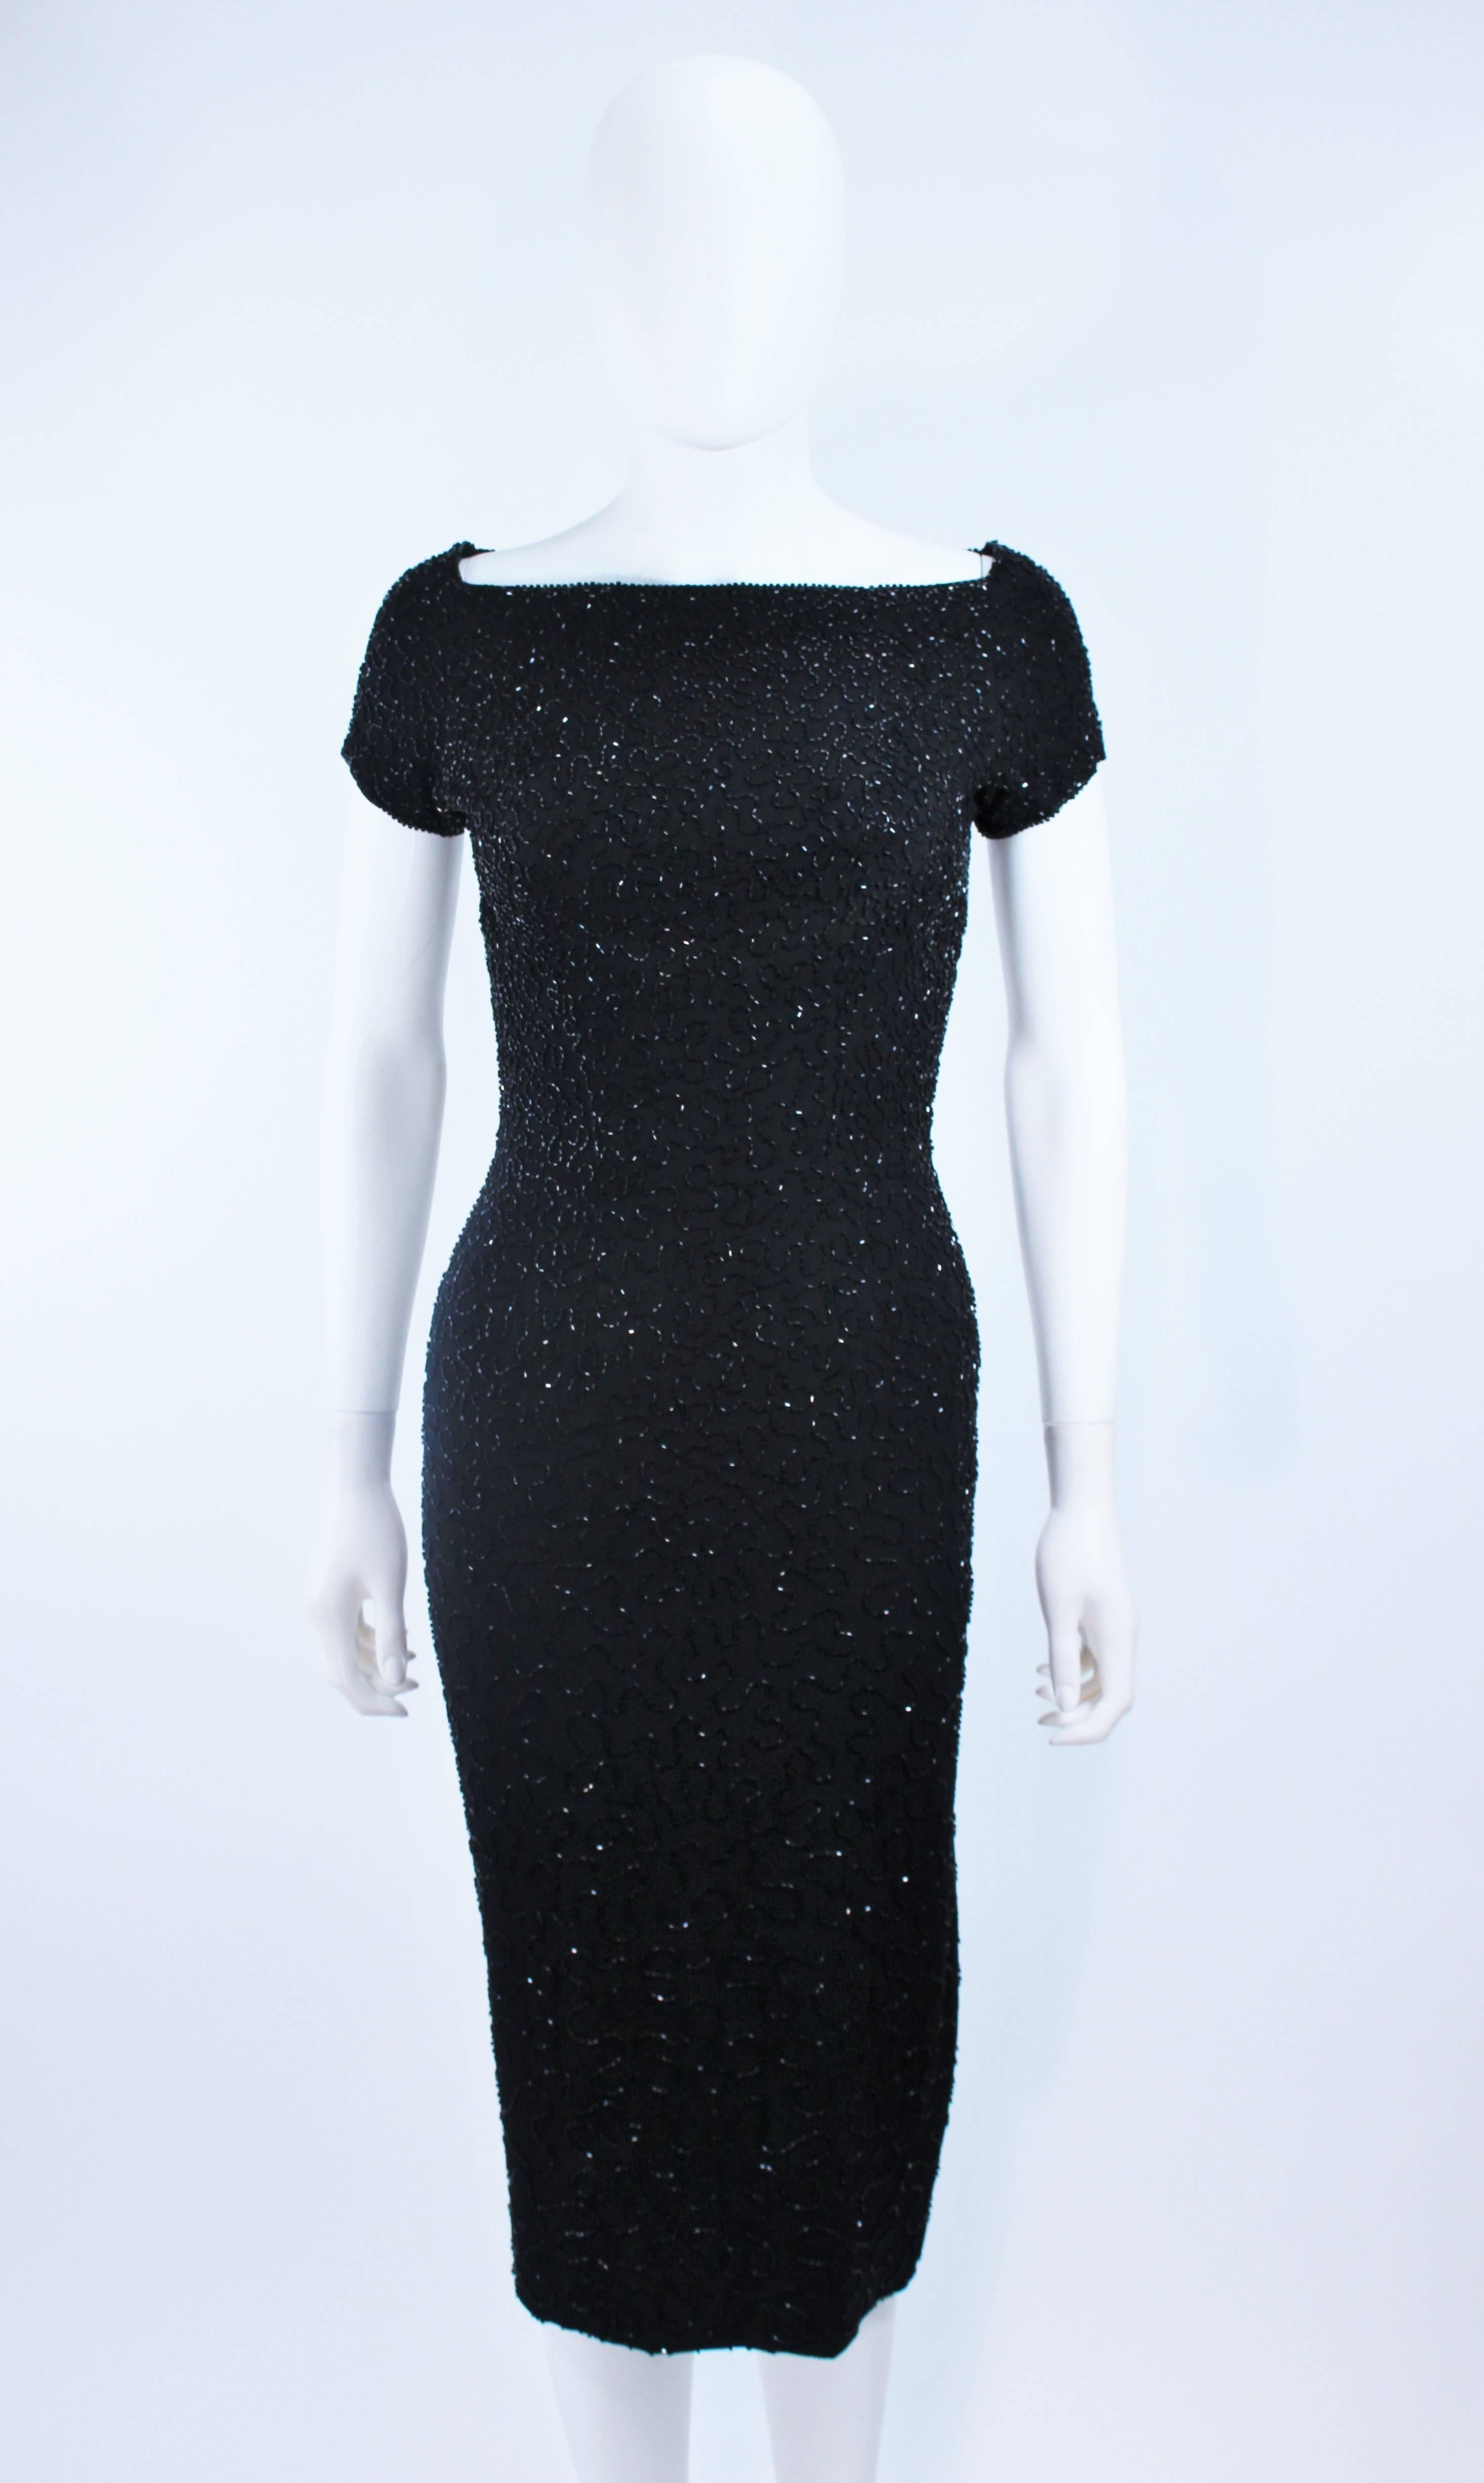 CEIL CHAPMAN Black Beaded Cocktail Dress with Square Neckline Size 2 In Excellent Condition For Sale In Los Angeles, CA